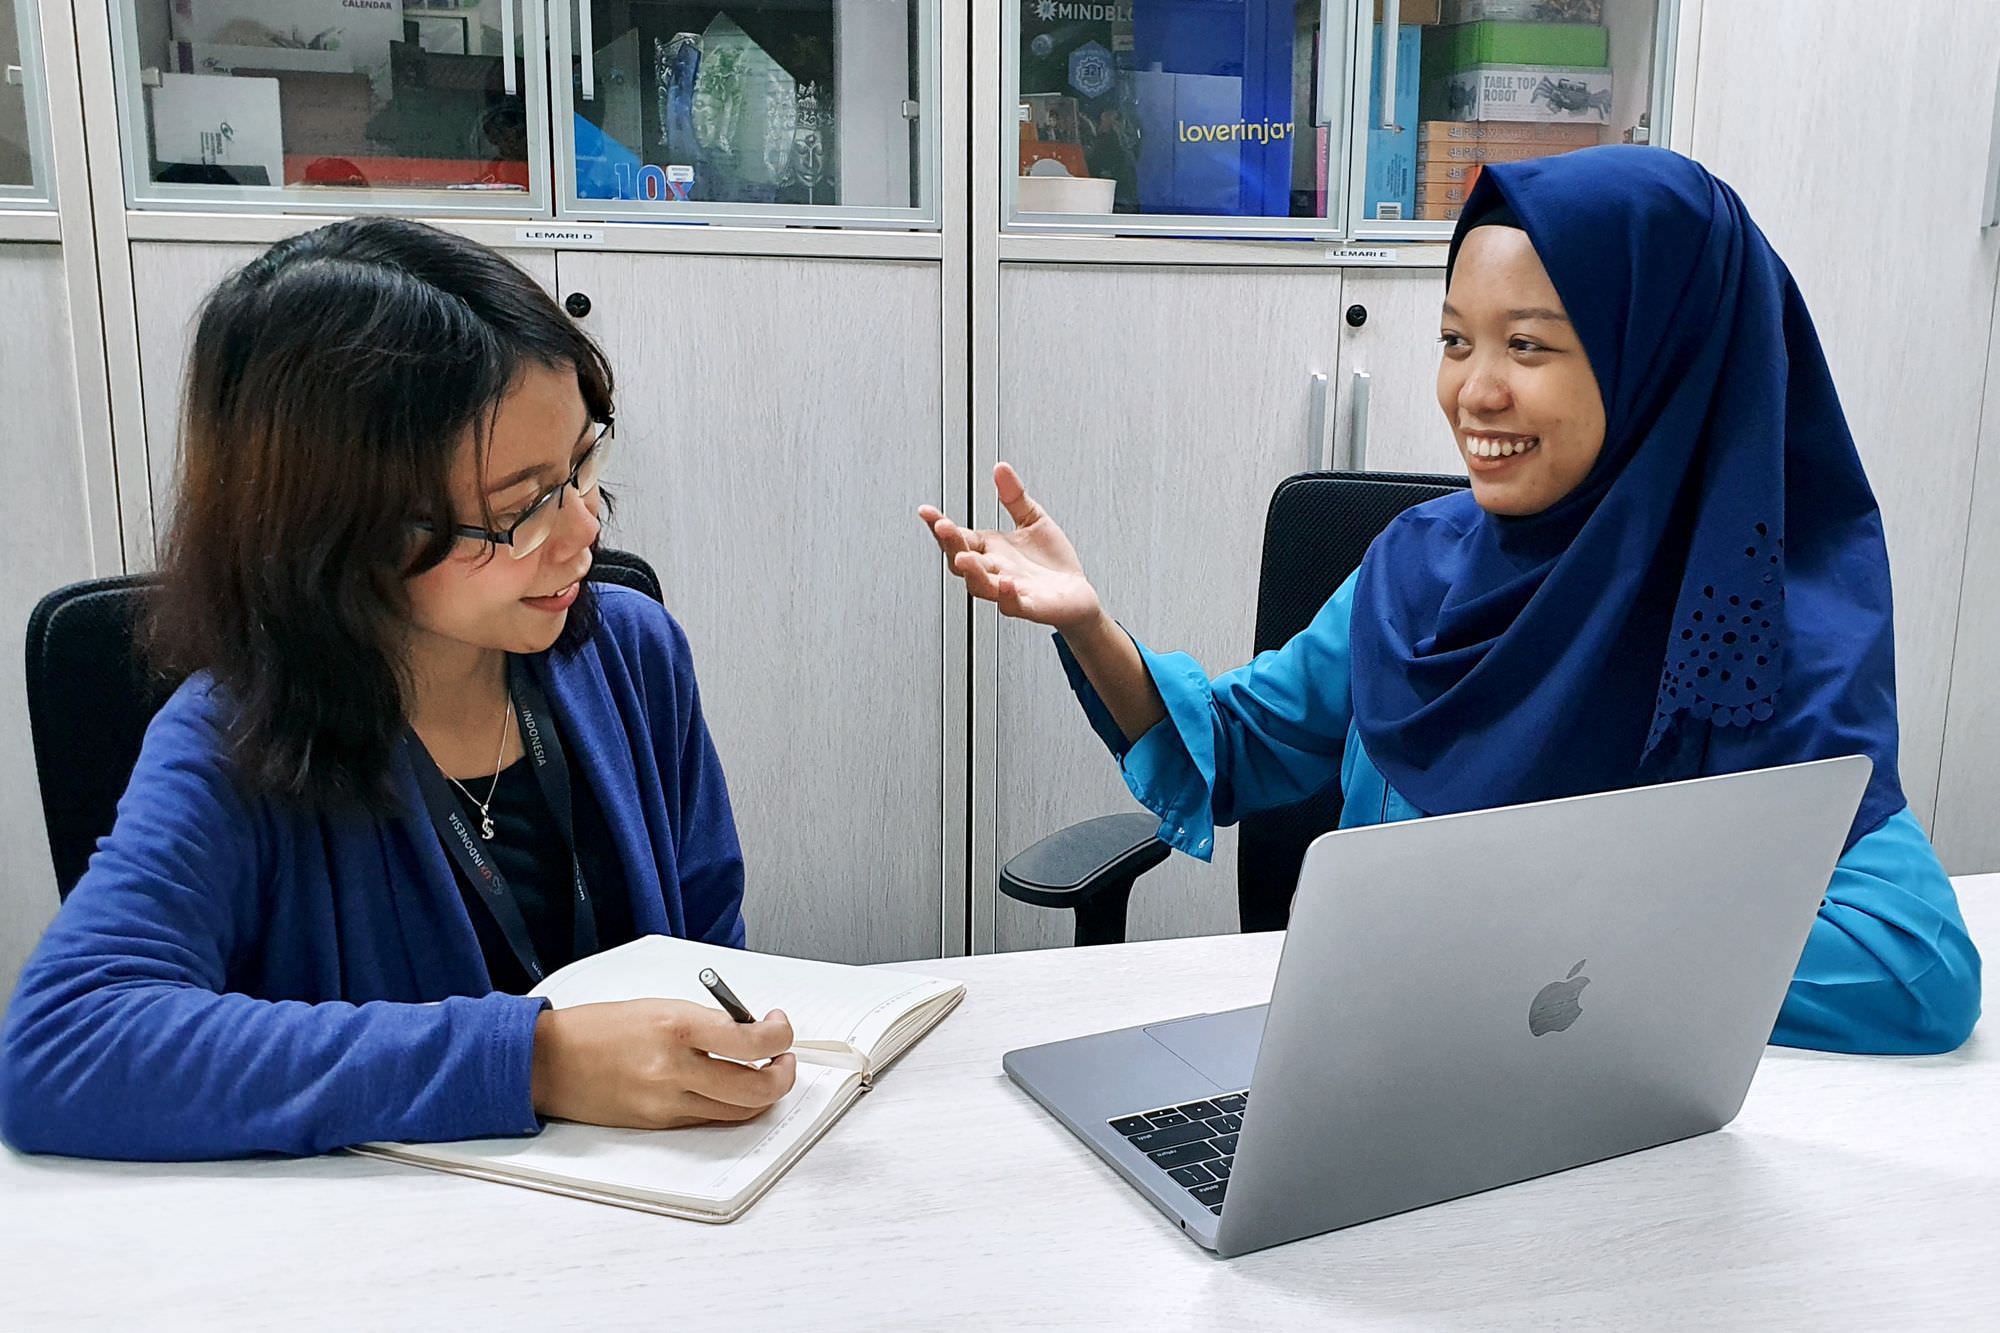 Two women participating in user interview. Researcher making notes as interviewee animatedly talks about their experience.